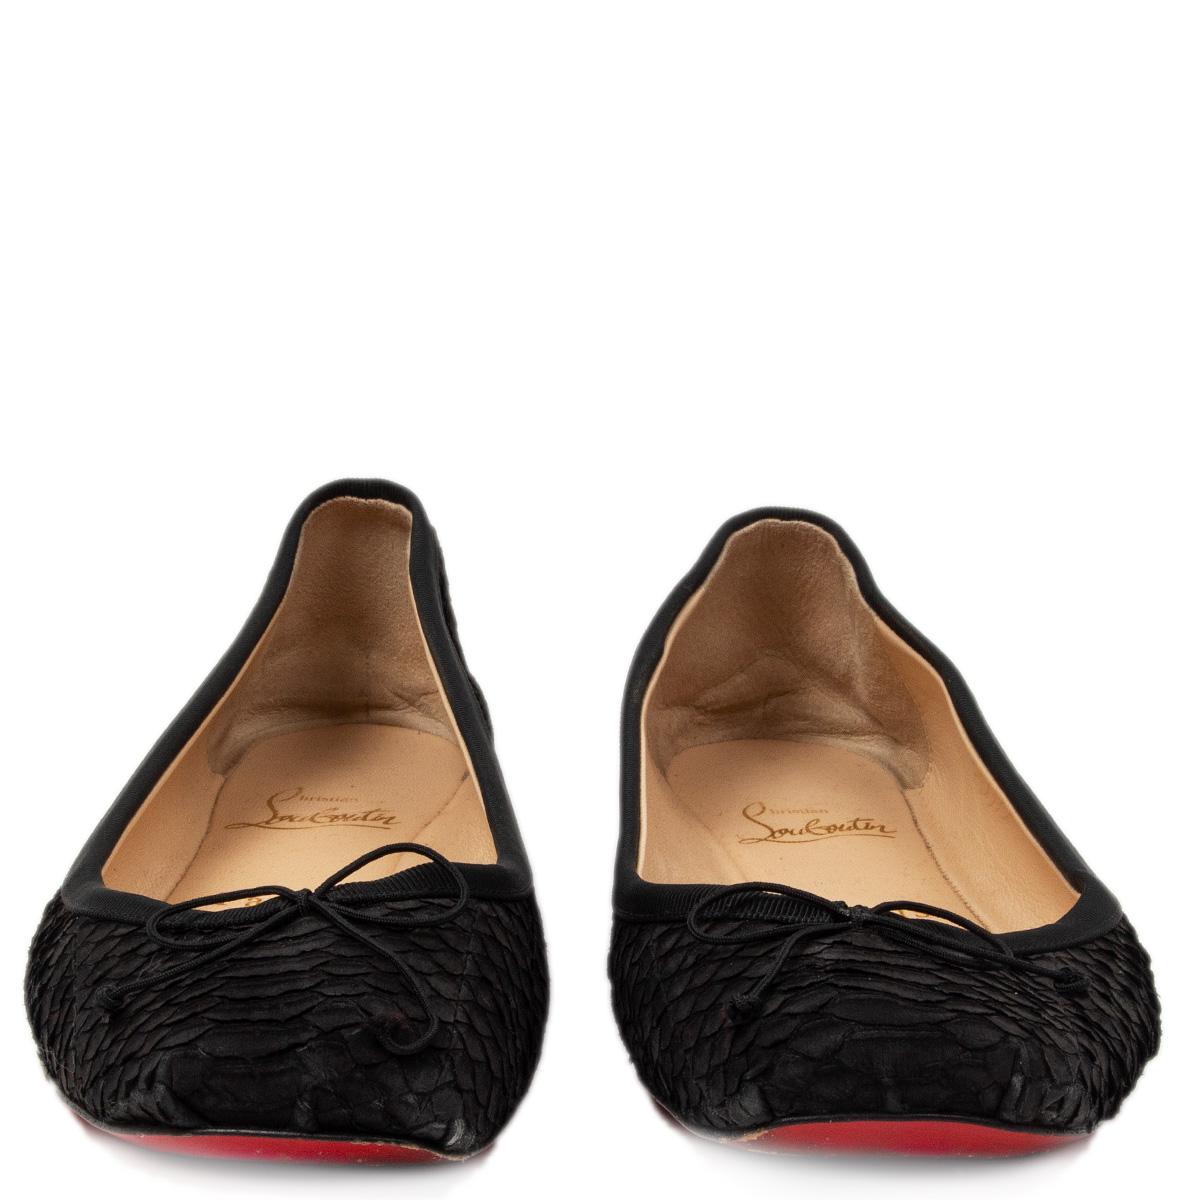 100% authentic Christian Louboutin Rosella flats in mat python leather. Have been worn and are in excellent condition. Come with dust bag.

Measurements
Imprinted Size	40
Shoe Size	40
Inside Sole	26cm (10.1in)
Width	7.5cm (2.9in)
Heel	0.5cm